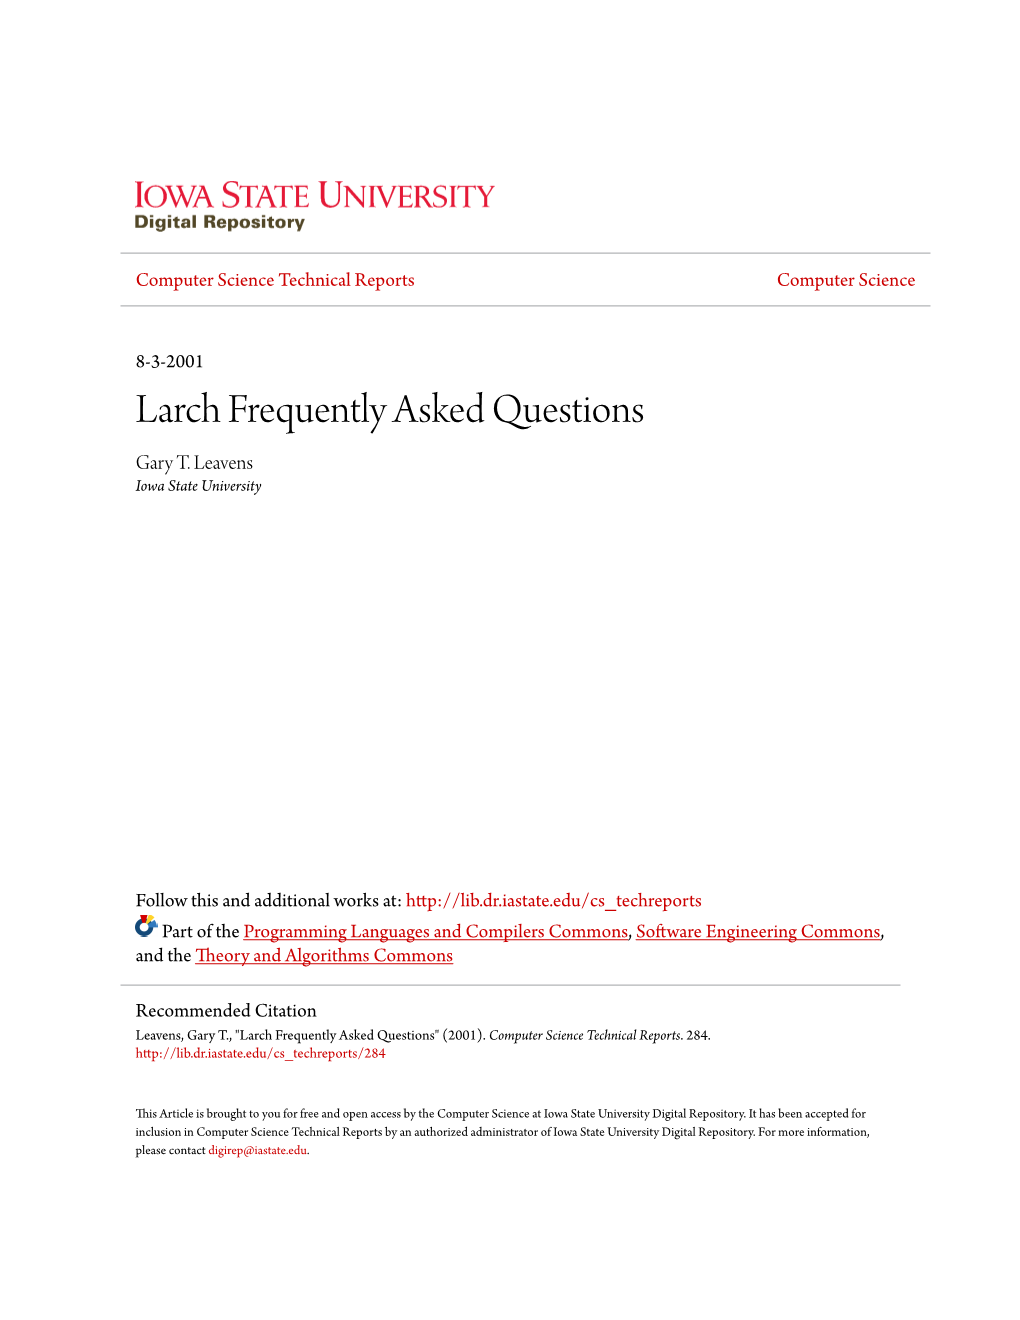 Larch Frequently Asked Questions Gary T